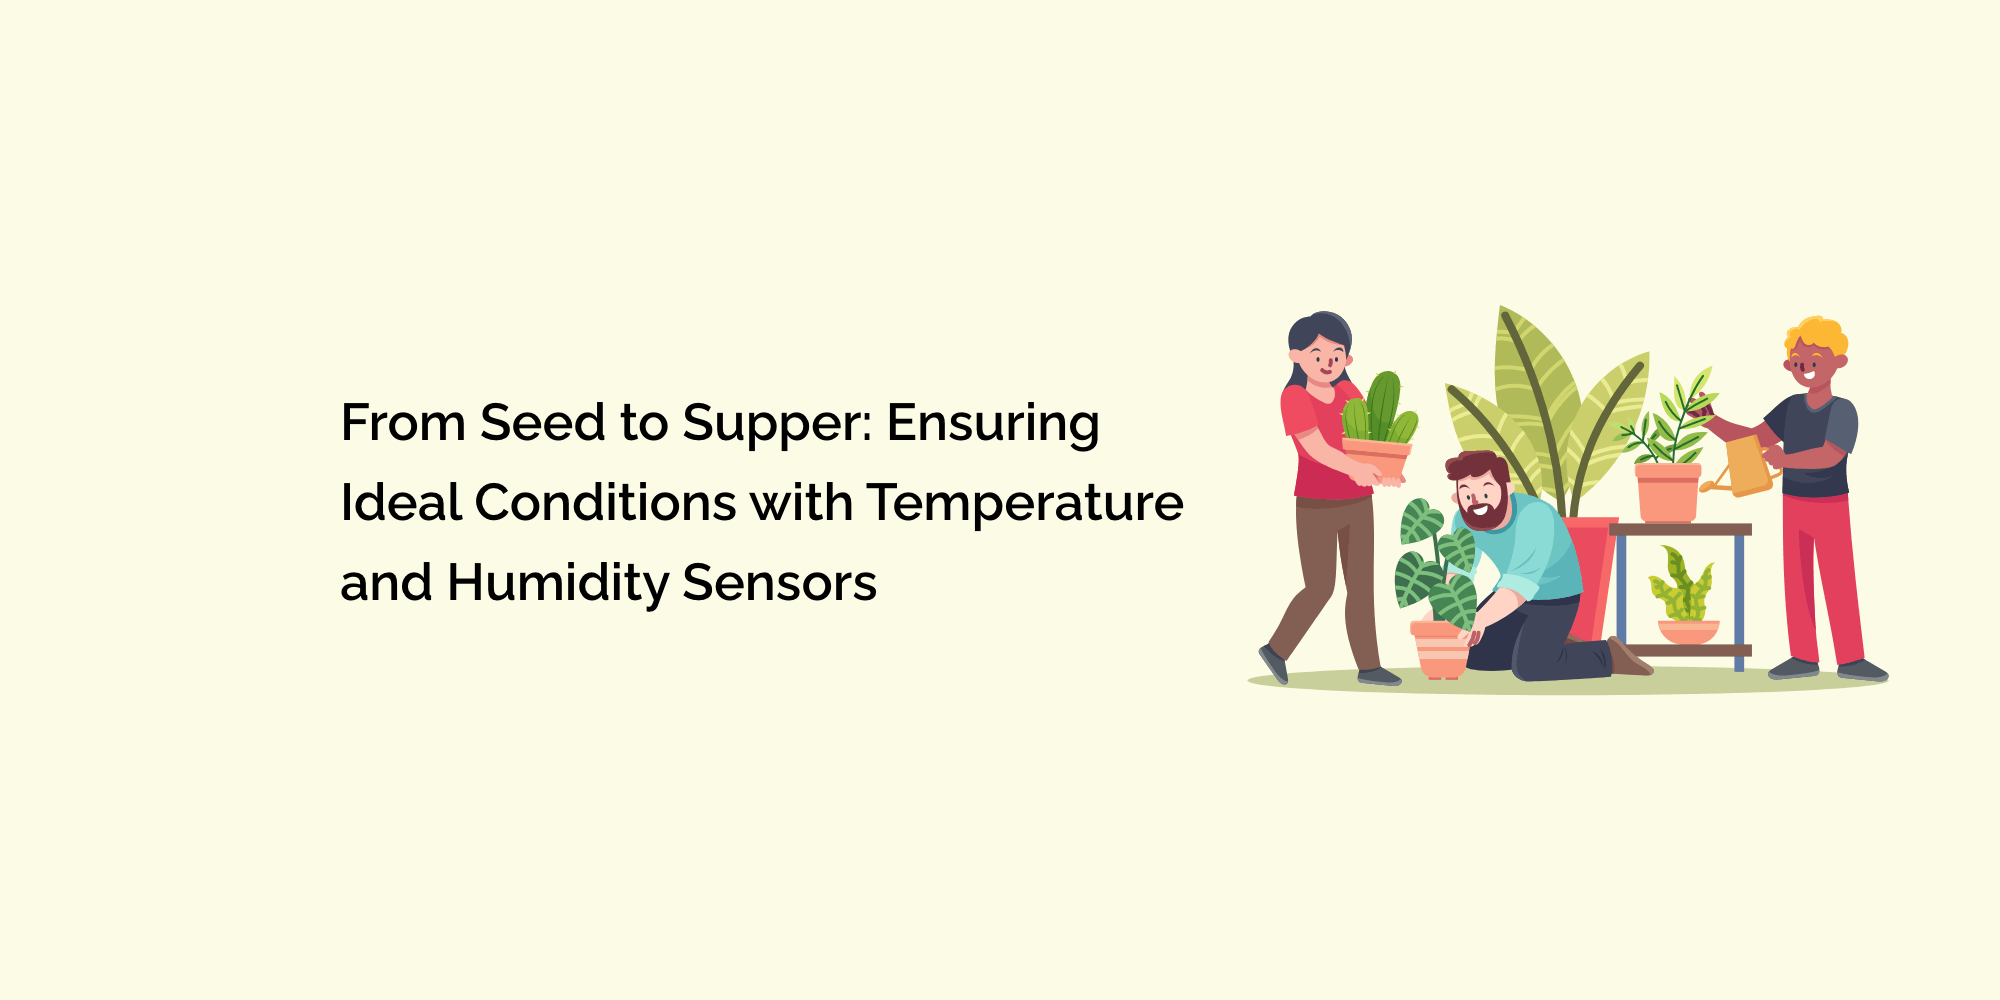 From Seed to Supper: Ensuring Ideal Conditions with Temperature and Humidity Sensors